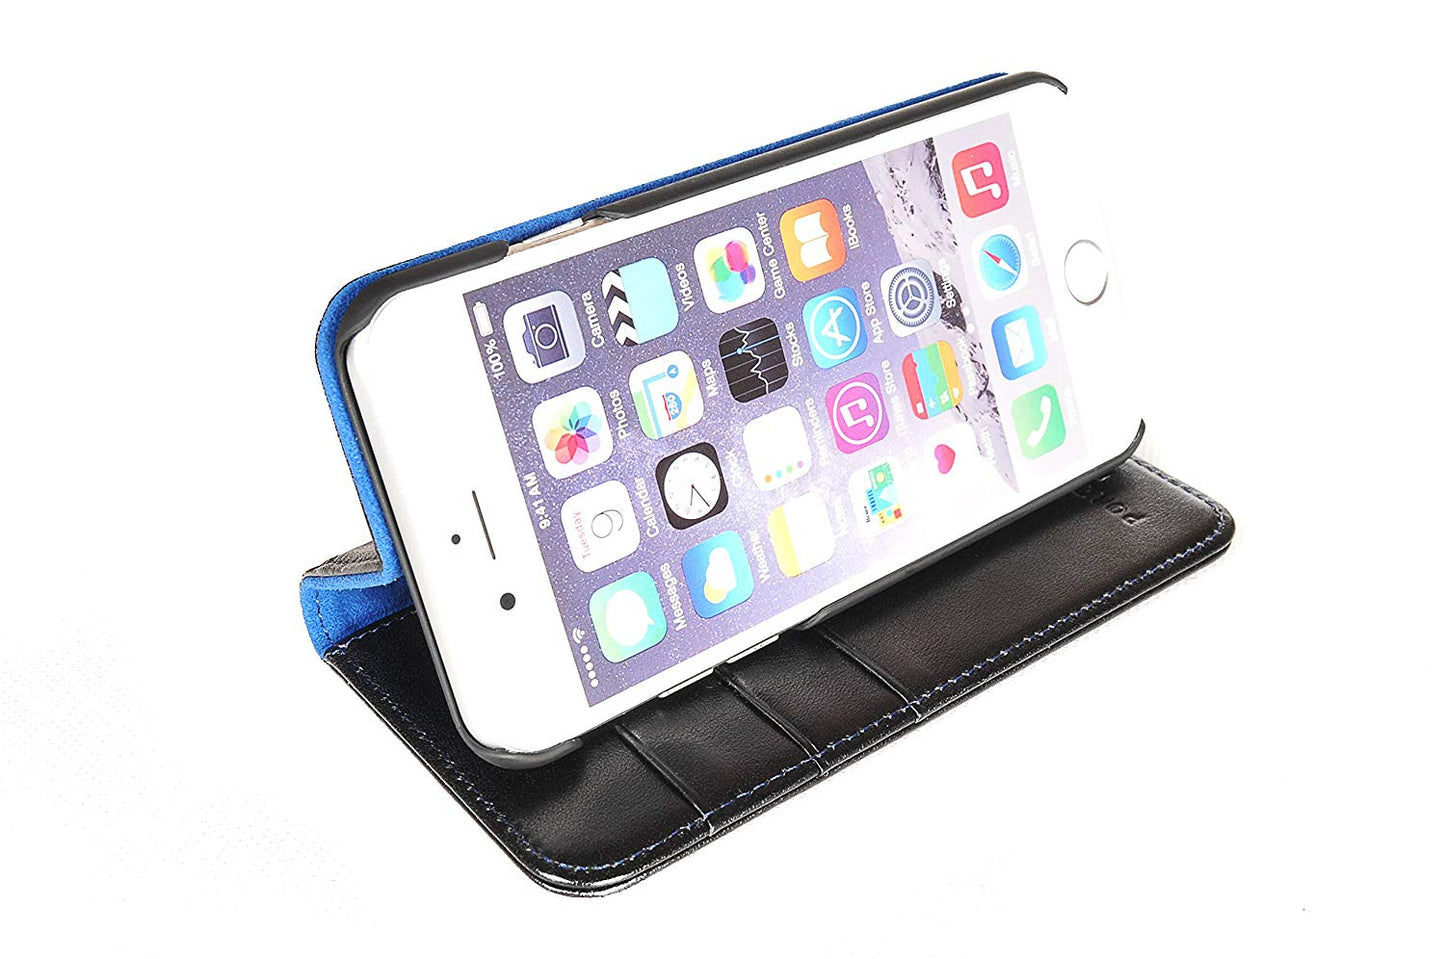 iPhone 6 / 6S Leather Case. Premium Slim Genuine Leather Stand Case/Cover/Wallet (Black & Blue)